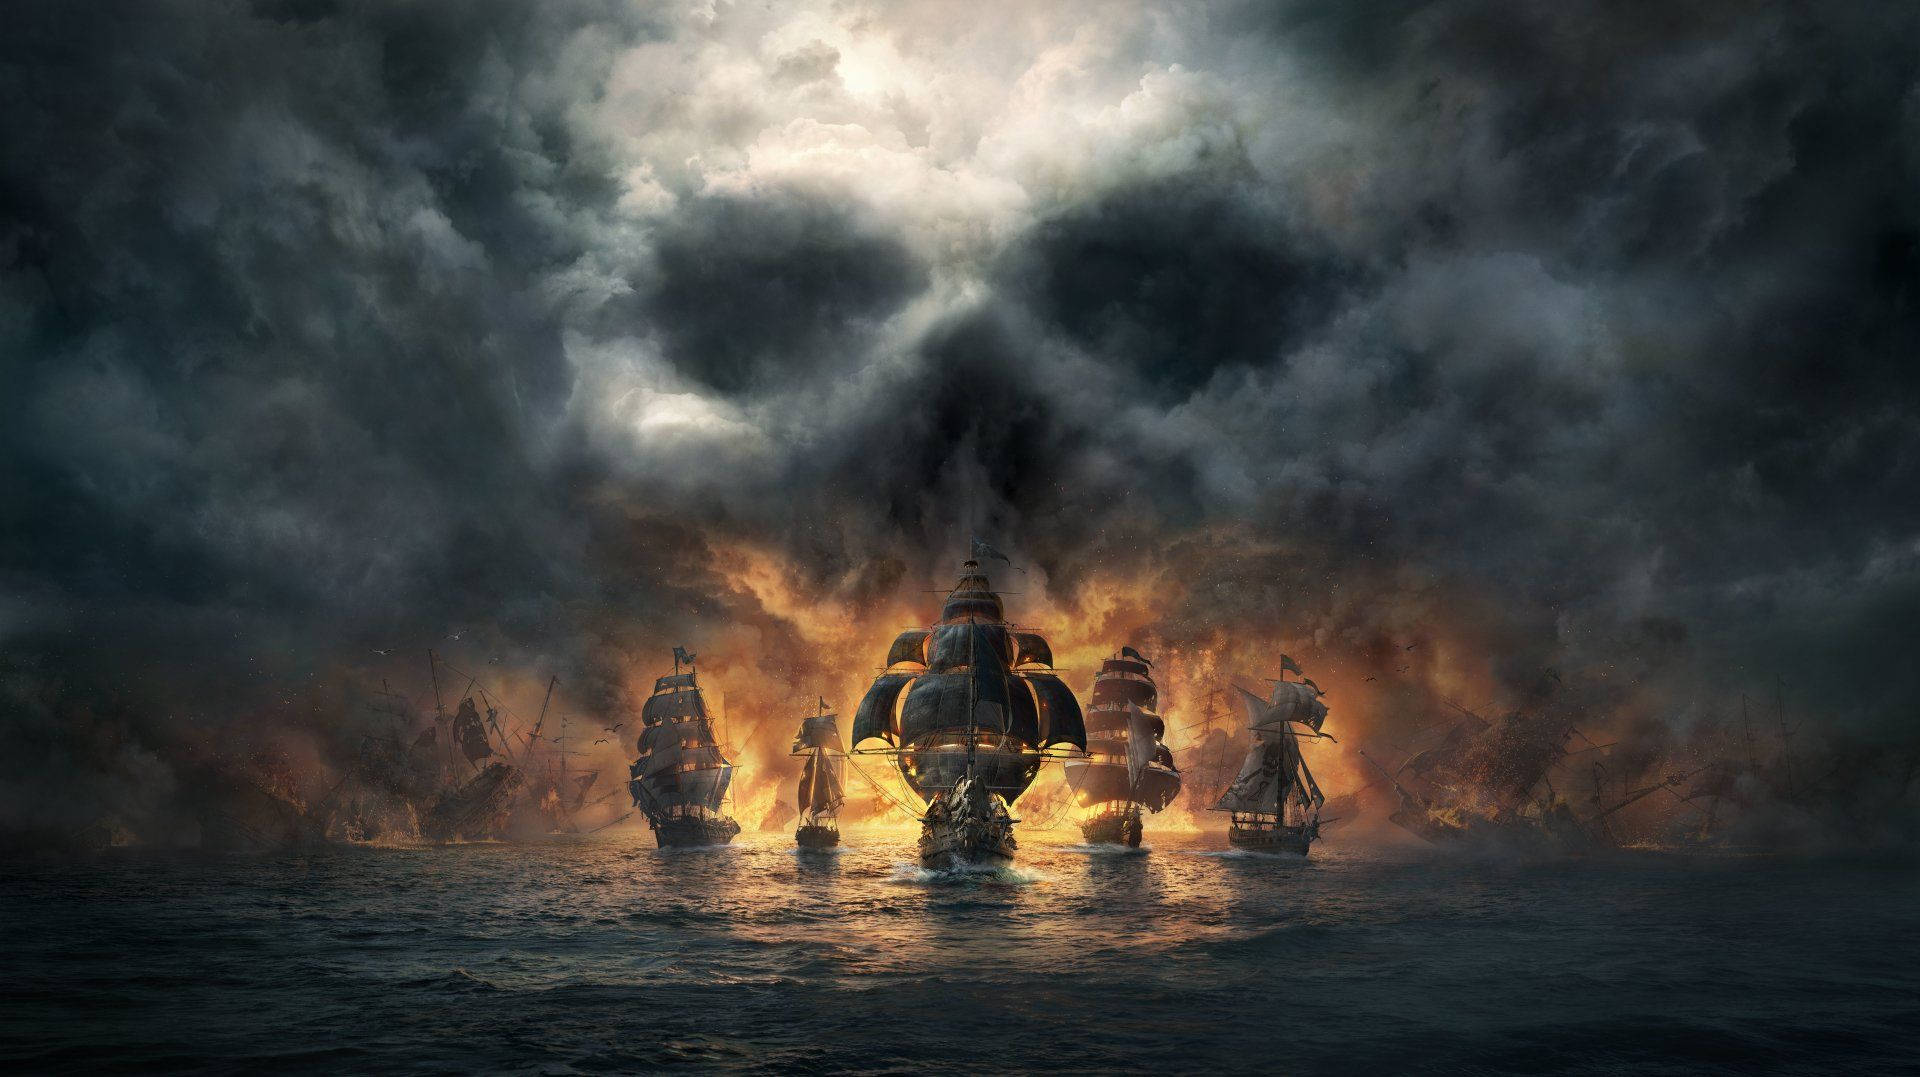 Arrrrgghh Navigate The Stormy Seas With A Skull In The Clouds To Guide You. Background